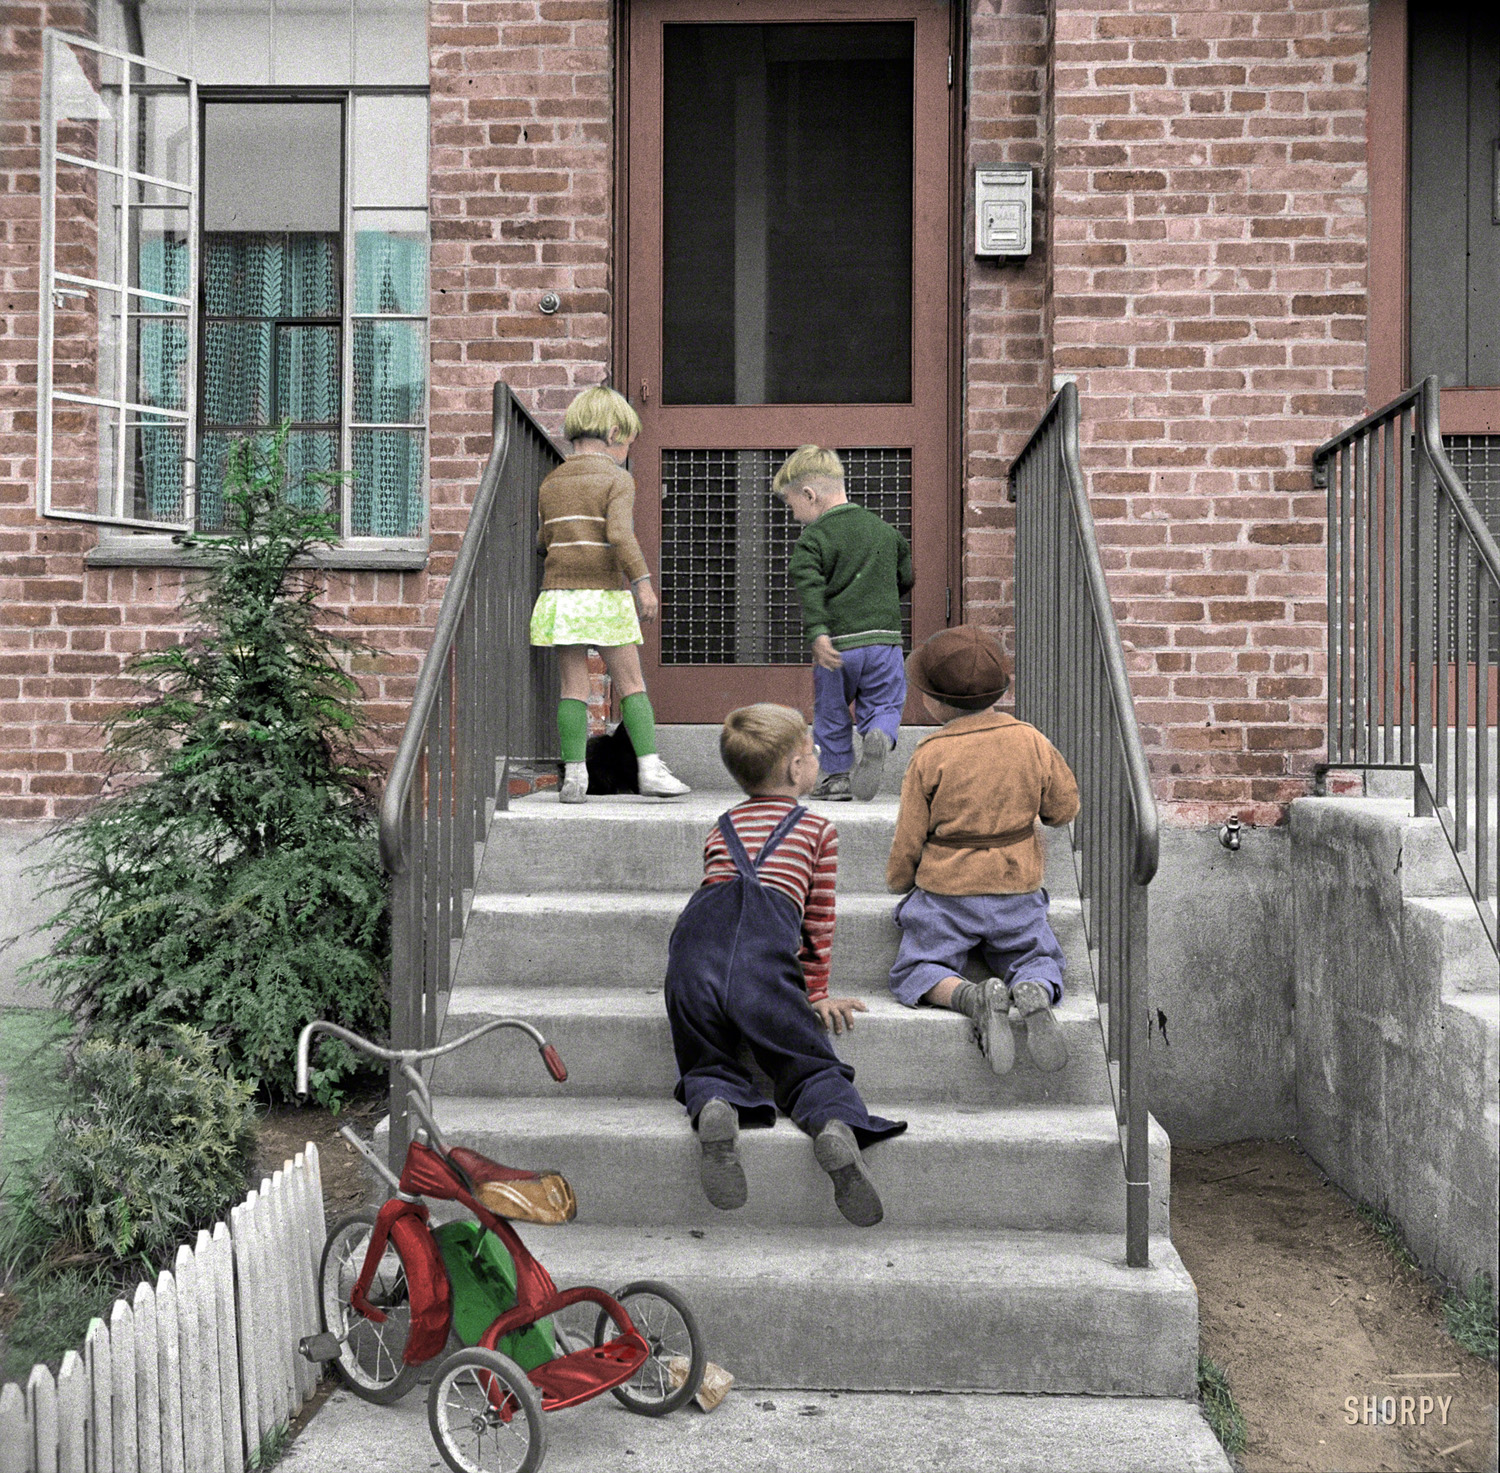 Colorized from this Shorpy original. Very nice shot. View full size.